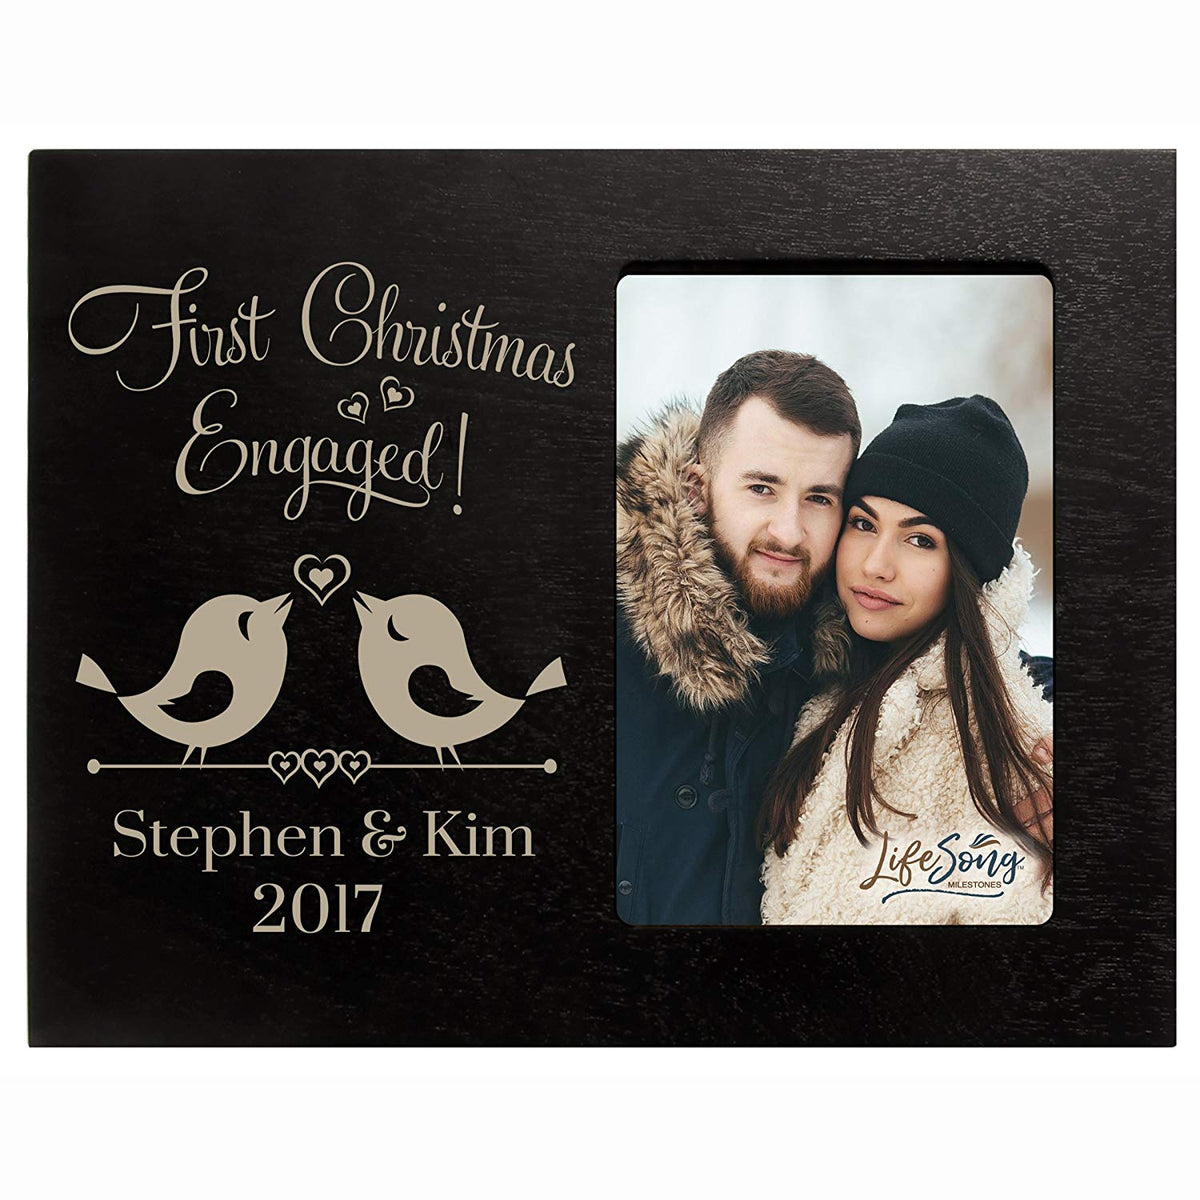 Personalized Home Christmas Bird Design Photo Frame Holds 4x6 Photograph - LifeSong Milestones